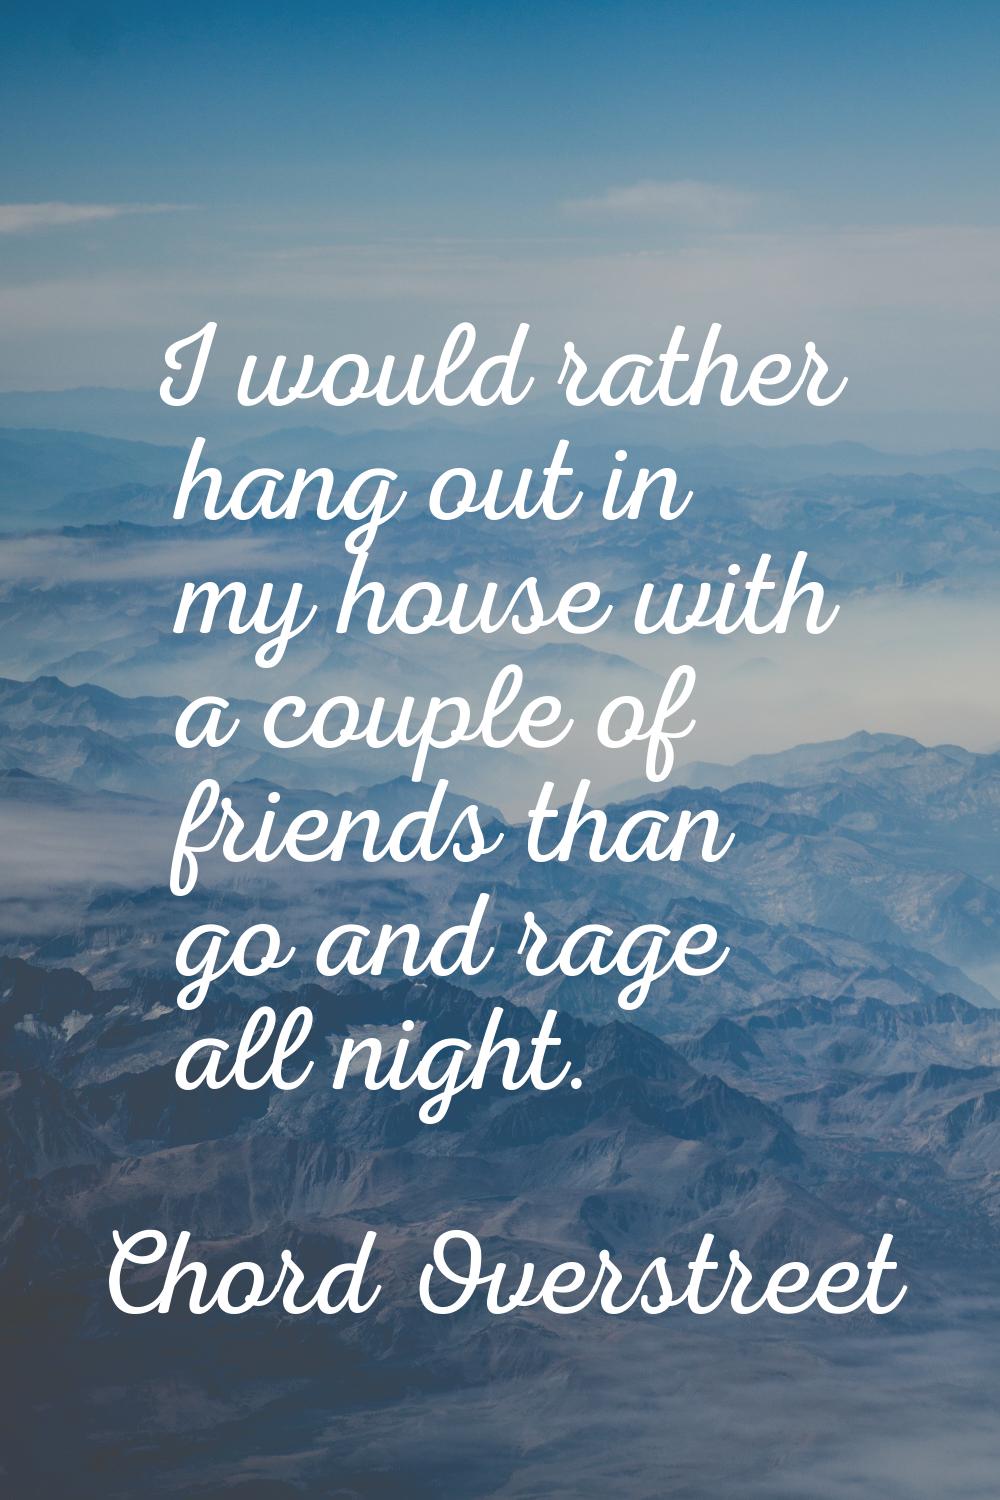 I would rather hang out in my house with a couple of friends than go and rage all night.